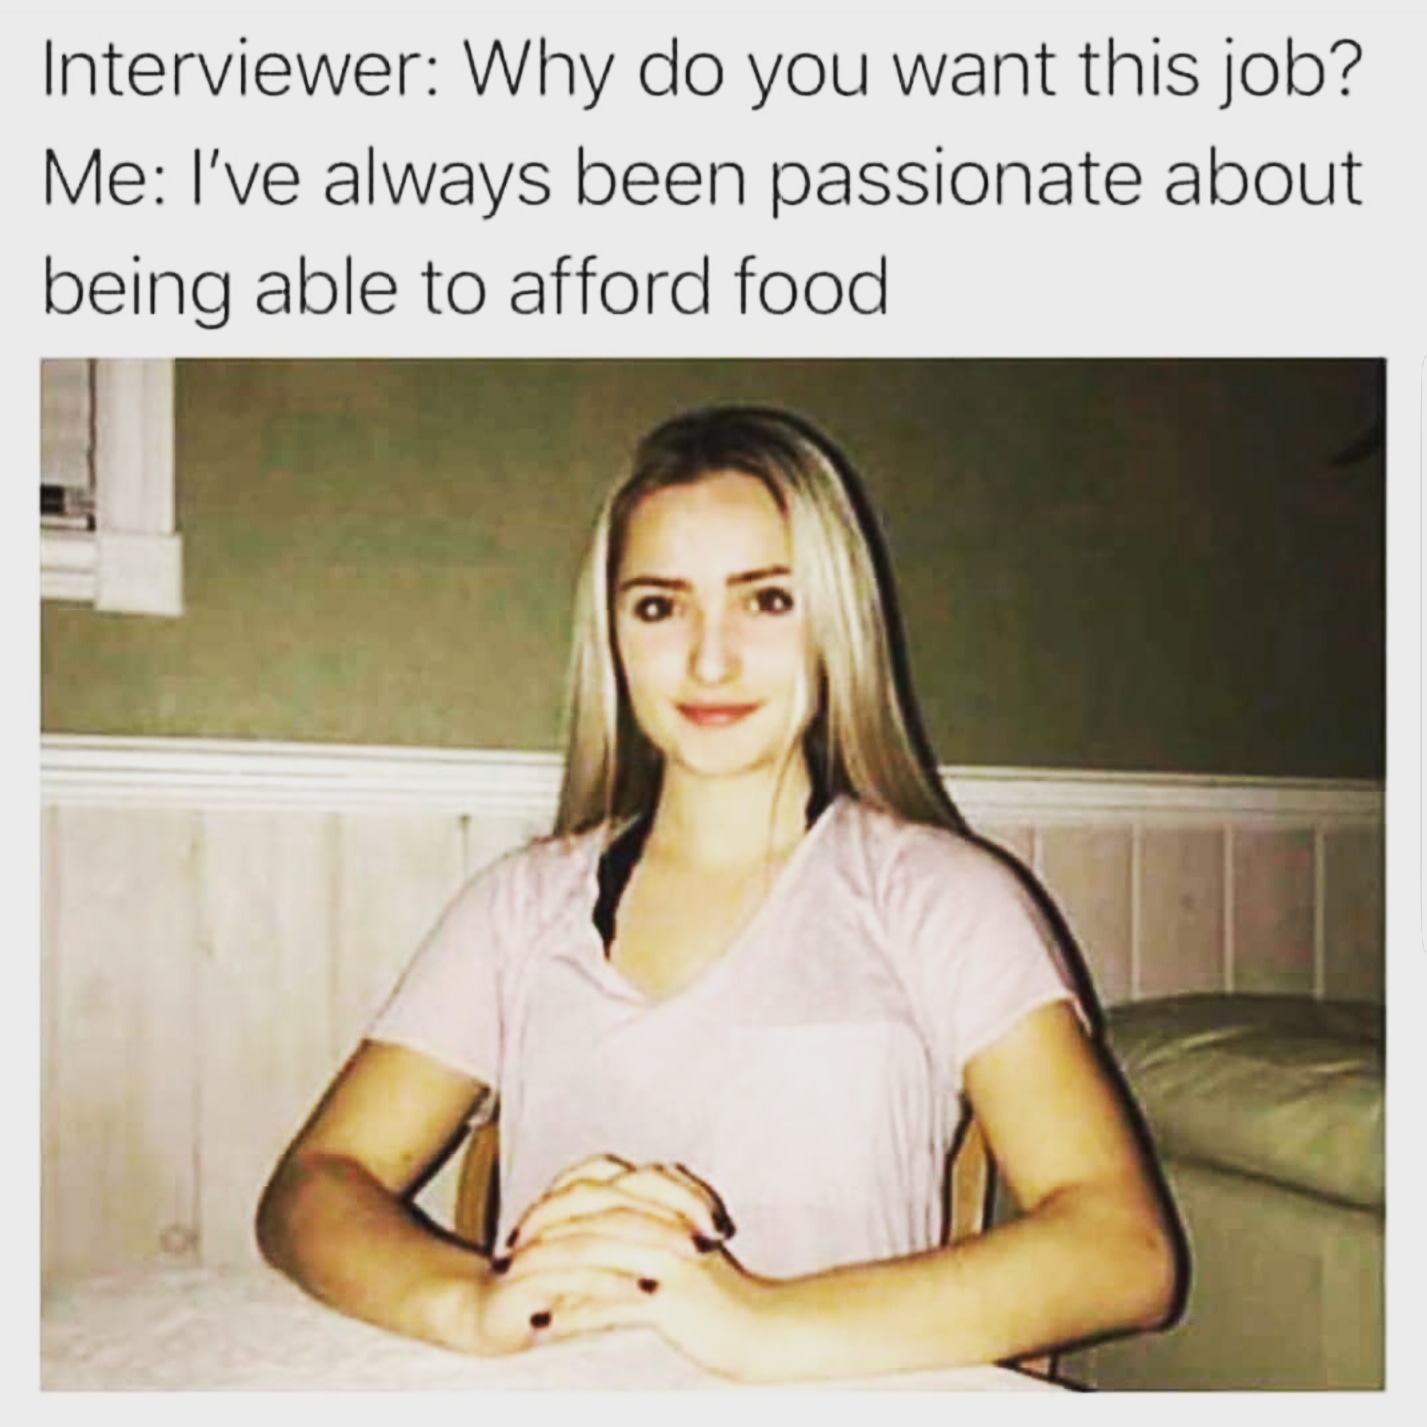 memes - meme me so hungry - Interviewer Why do you want this job? Me I've always been passionate about being able to afford food